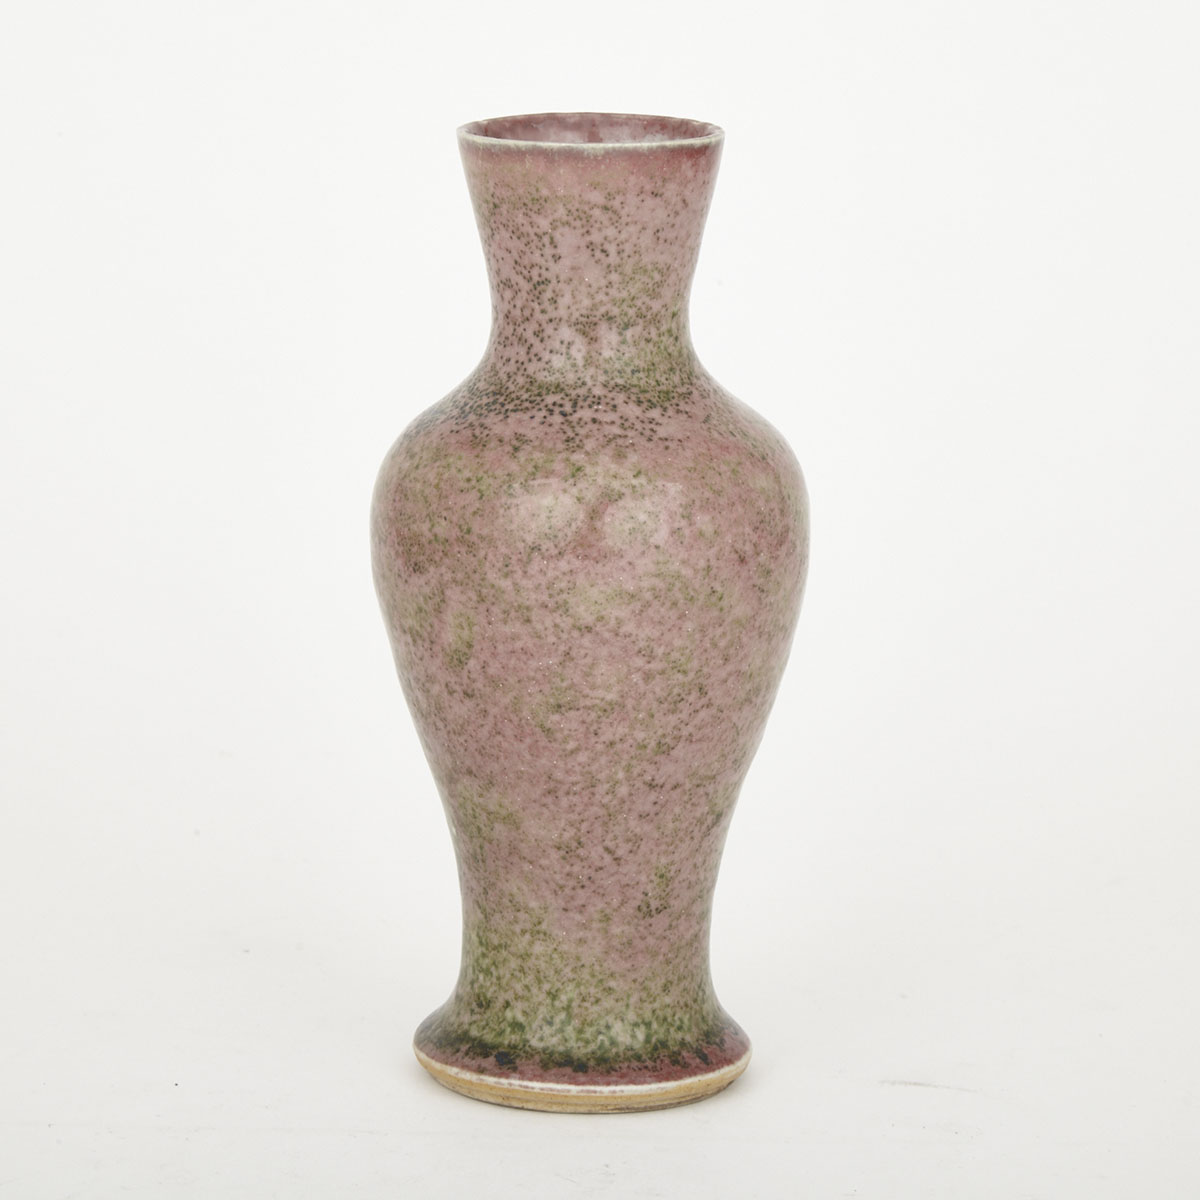 Copper Red Glazed Vase, Late Qing Dynasty